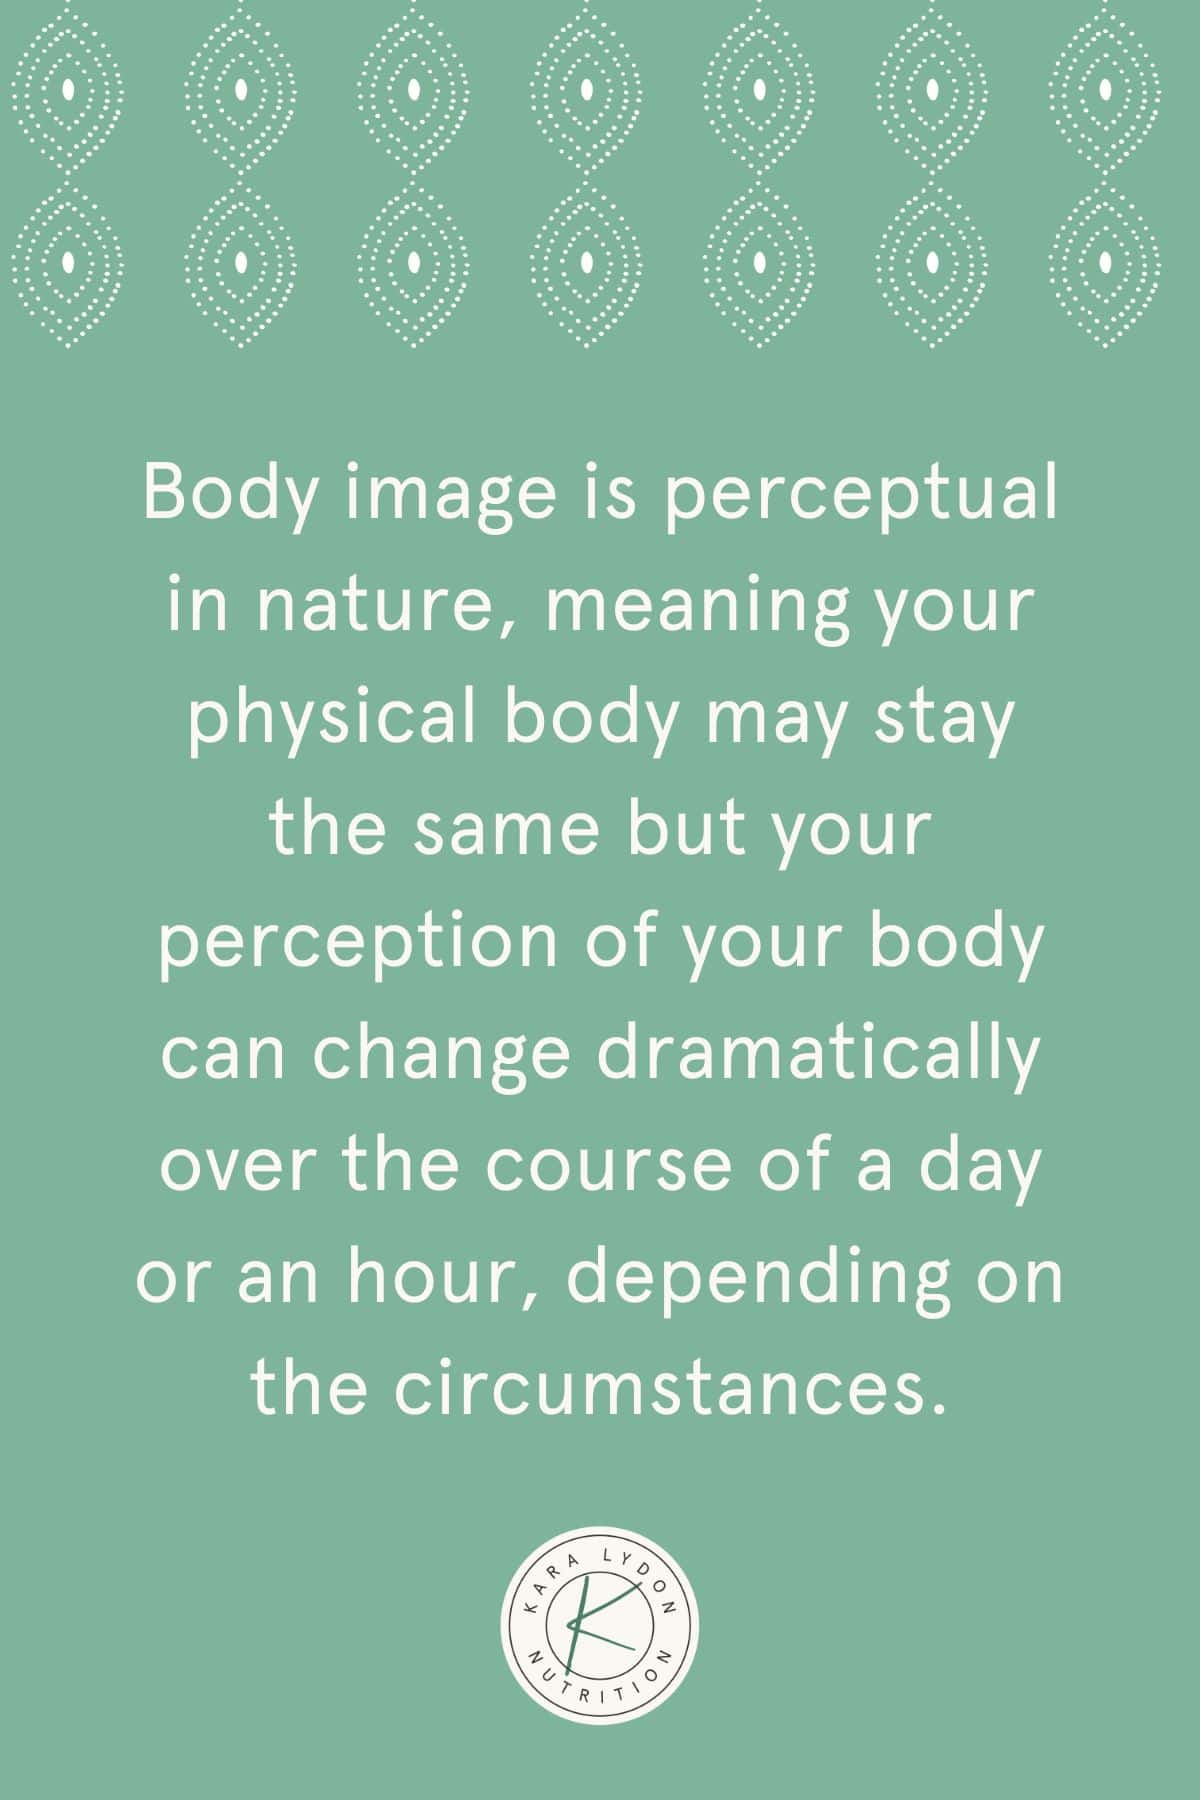 Graphic with quote: "Body image is perceptual in nature, meaning your physical body may stay the same but your perception of your body can change dramatically over the course of a day or an hour, depending on the circumstances."